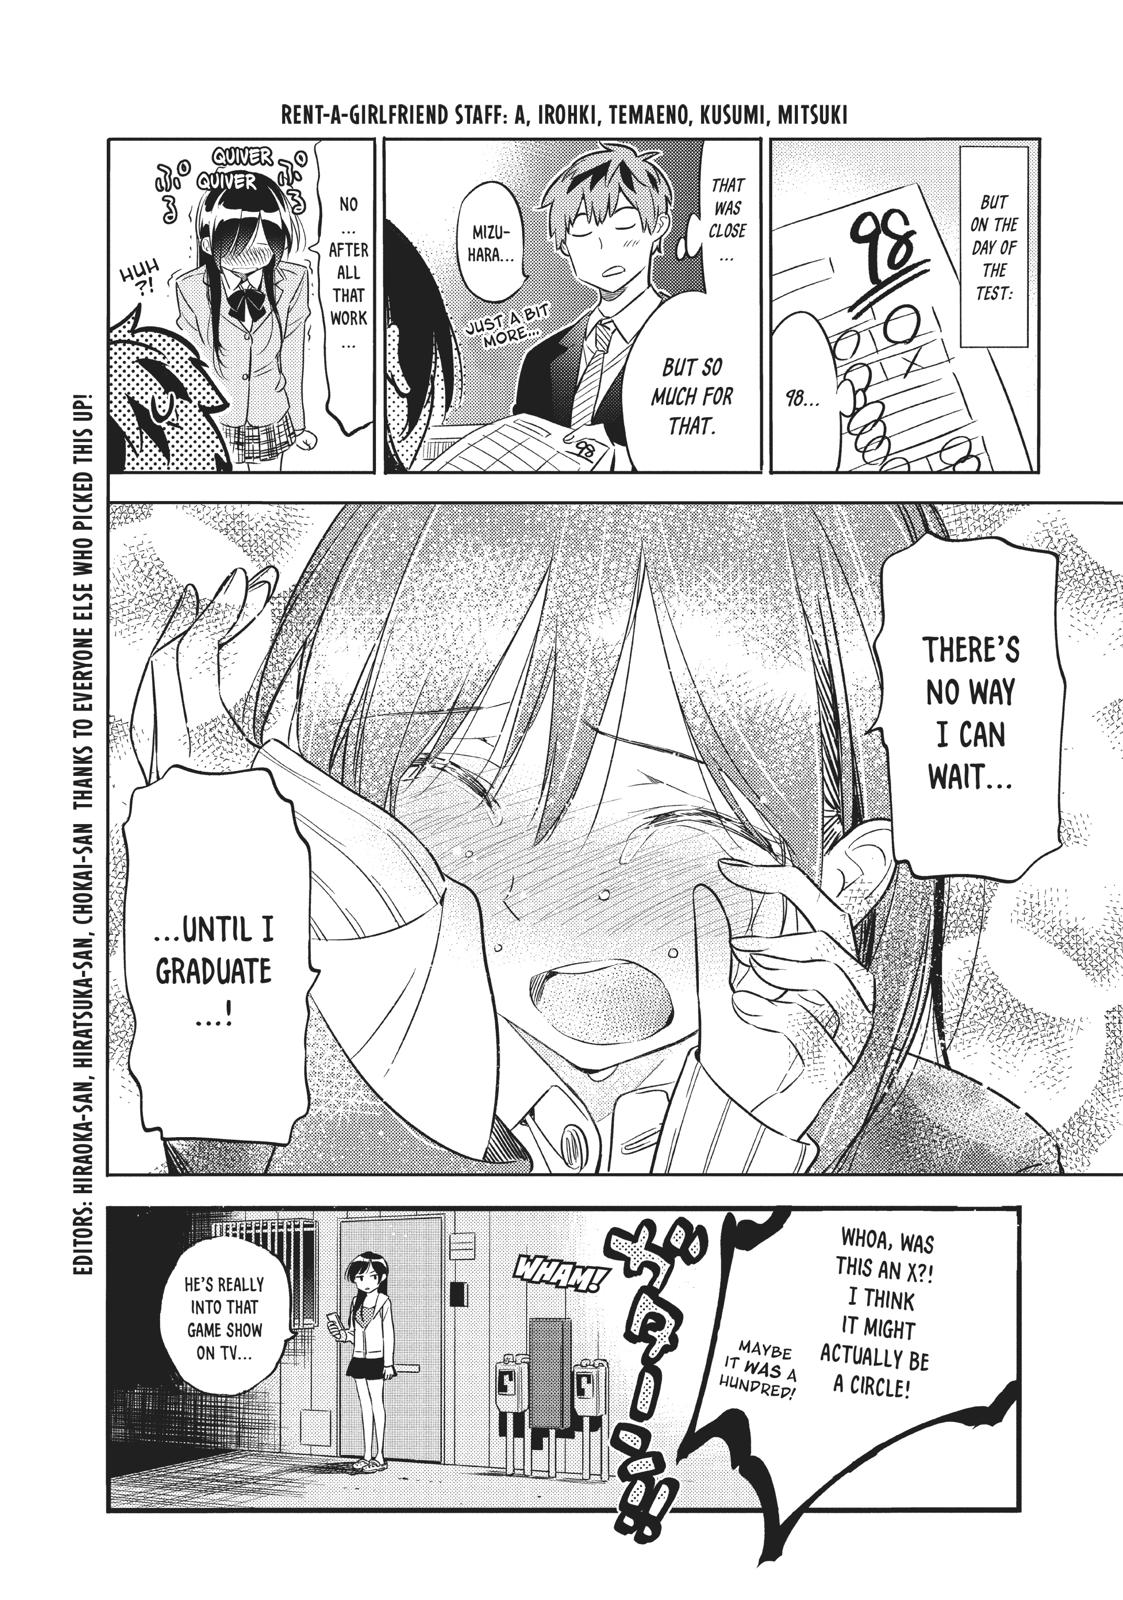 Rent A GirlFriend, Chapter 32 image 022